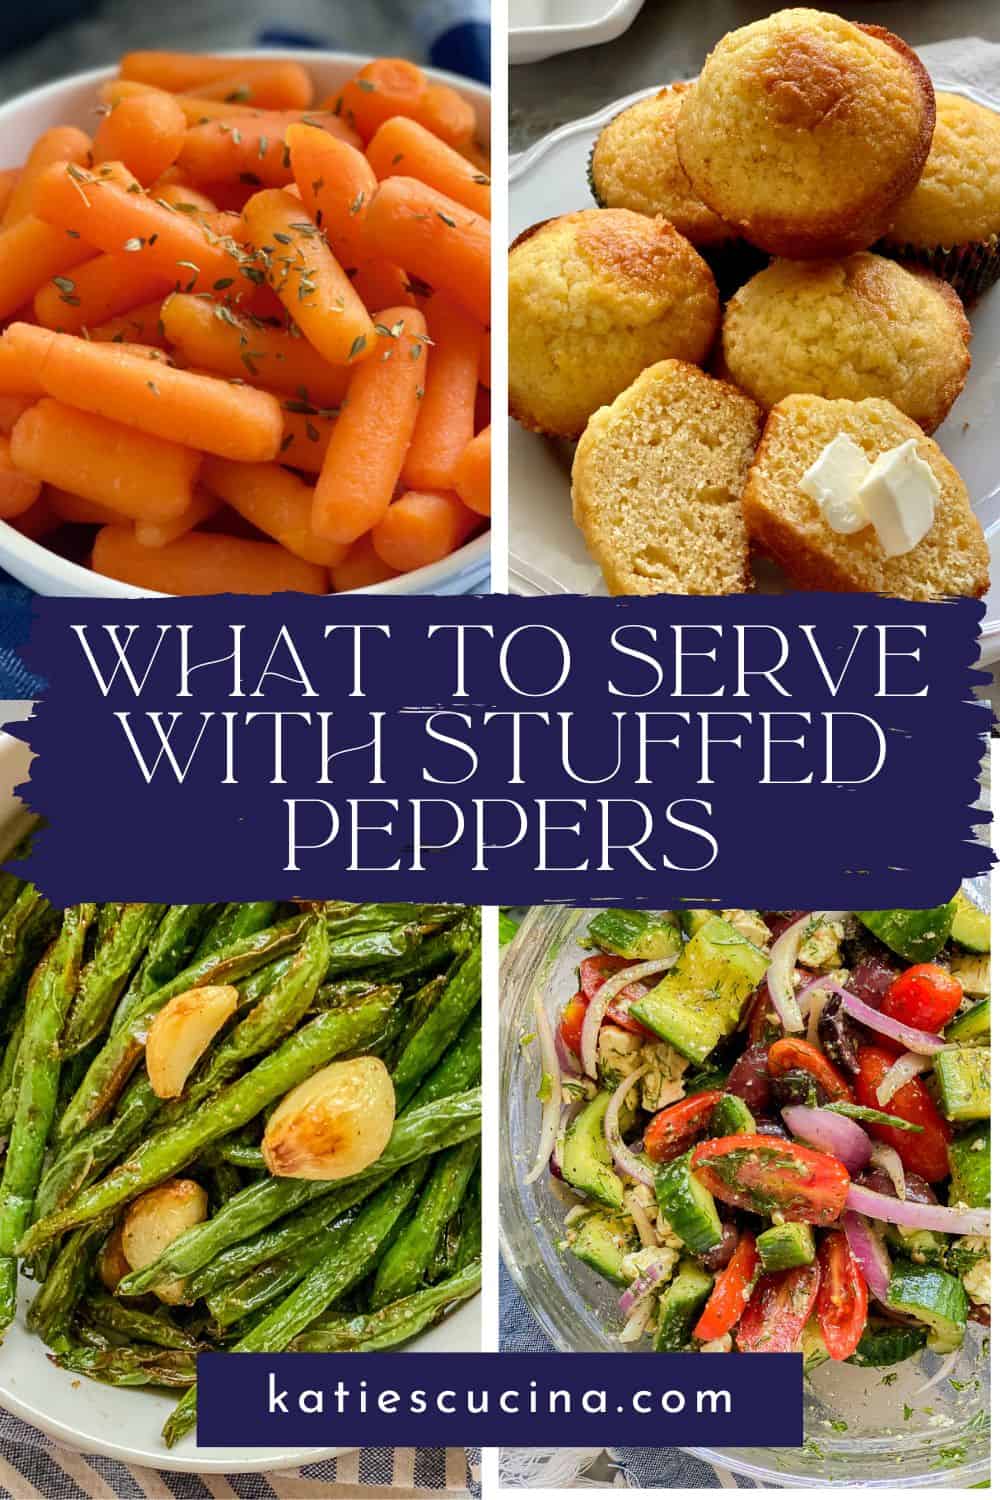 four side dishes; carrots, green beans, cornbread muffins, and salad with text on image for pinterest.